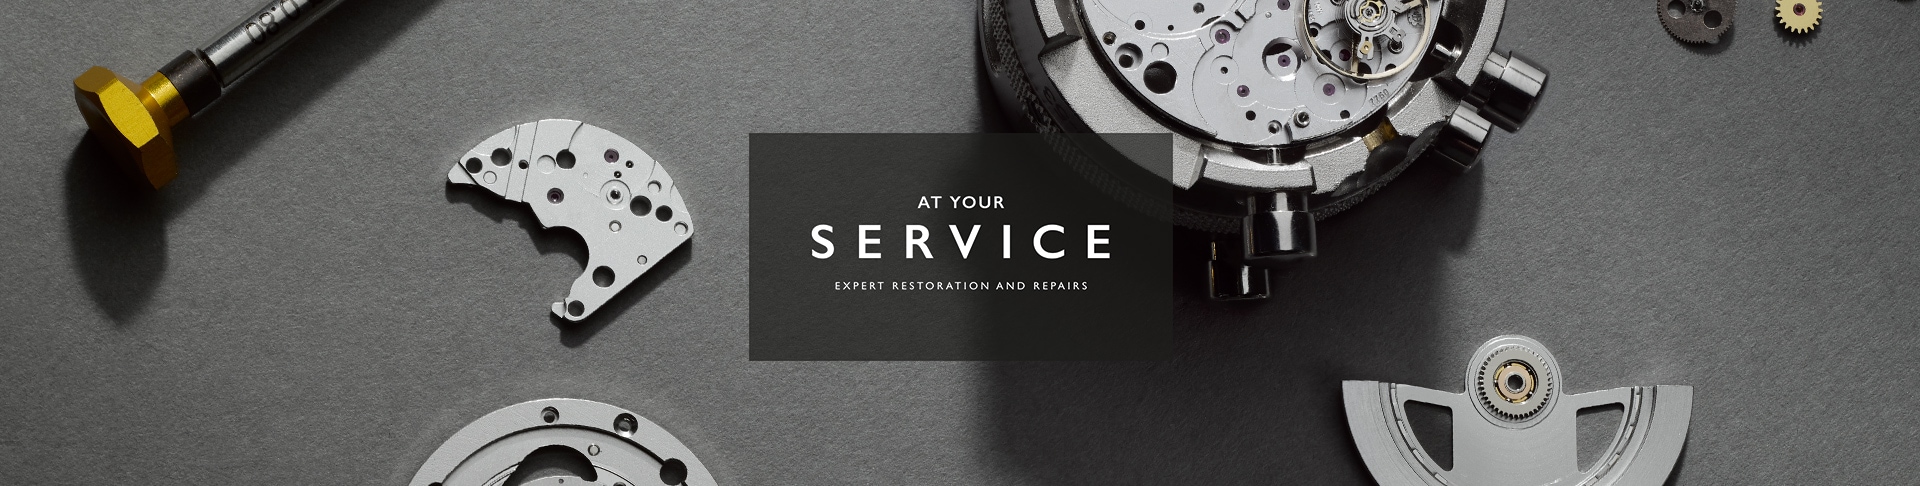 at your service, watches and jewellery services at goldsmiths